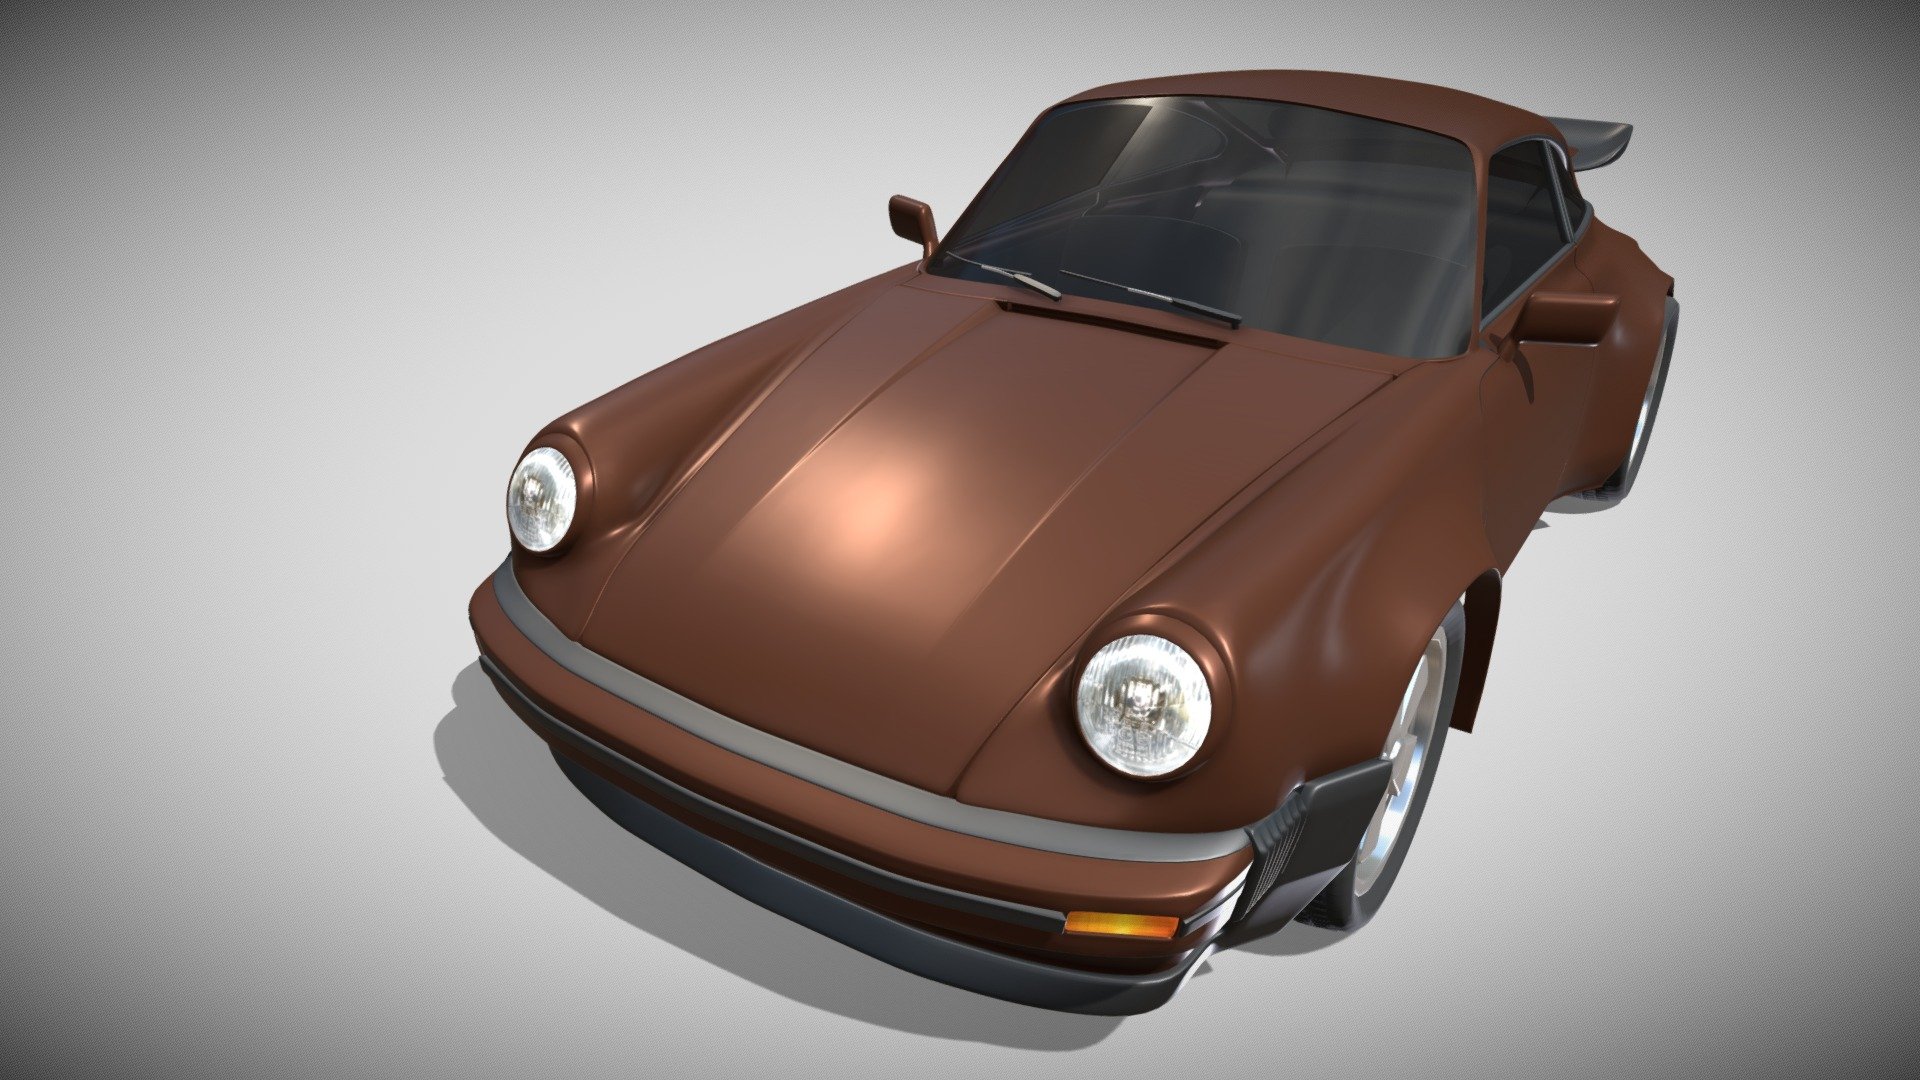 A very accurate model of a 1975 Porsche 911. The model comes in three formats:
-.blend, rendered with cycles, as seen in the images;
-.obj, with materials and textures applied;
-.dae, with materials and textures applied;

This 3d model was originally created in Blender 2.69 and rendered with Cycles.
The model has materials applied in all formats, and are ready to import and render.
The model is built strictly out of quads and is subdivisable:

Subdivision 0: 136,706 verts / 134,054 polys
Subdivision 1: 187,328 verts / 178,336 polys
Subdivision 2: 245,590 verts / 240,078 polys

It comes in separate parts, named correctly for the sake of convenience.

For any problems please feel free to contact me.

Don't forget to rate and enjoy! - 1975 Porsche 911 930 - Buy Royalty Free 3D model by dragosburian 3d model